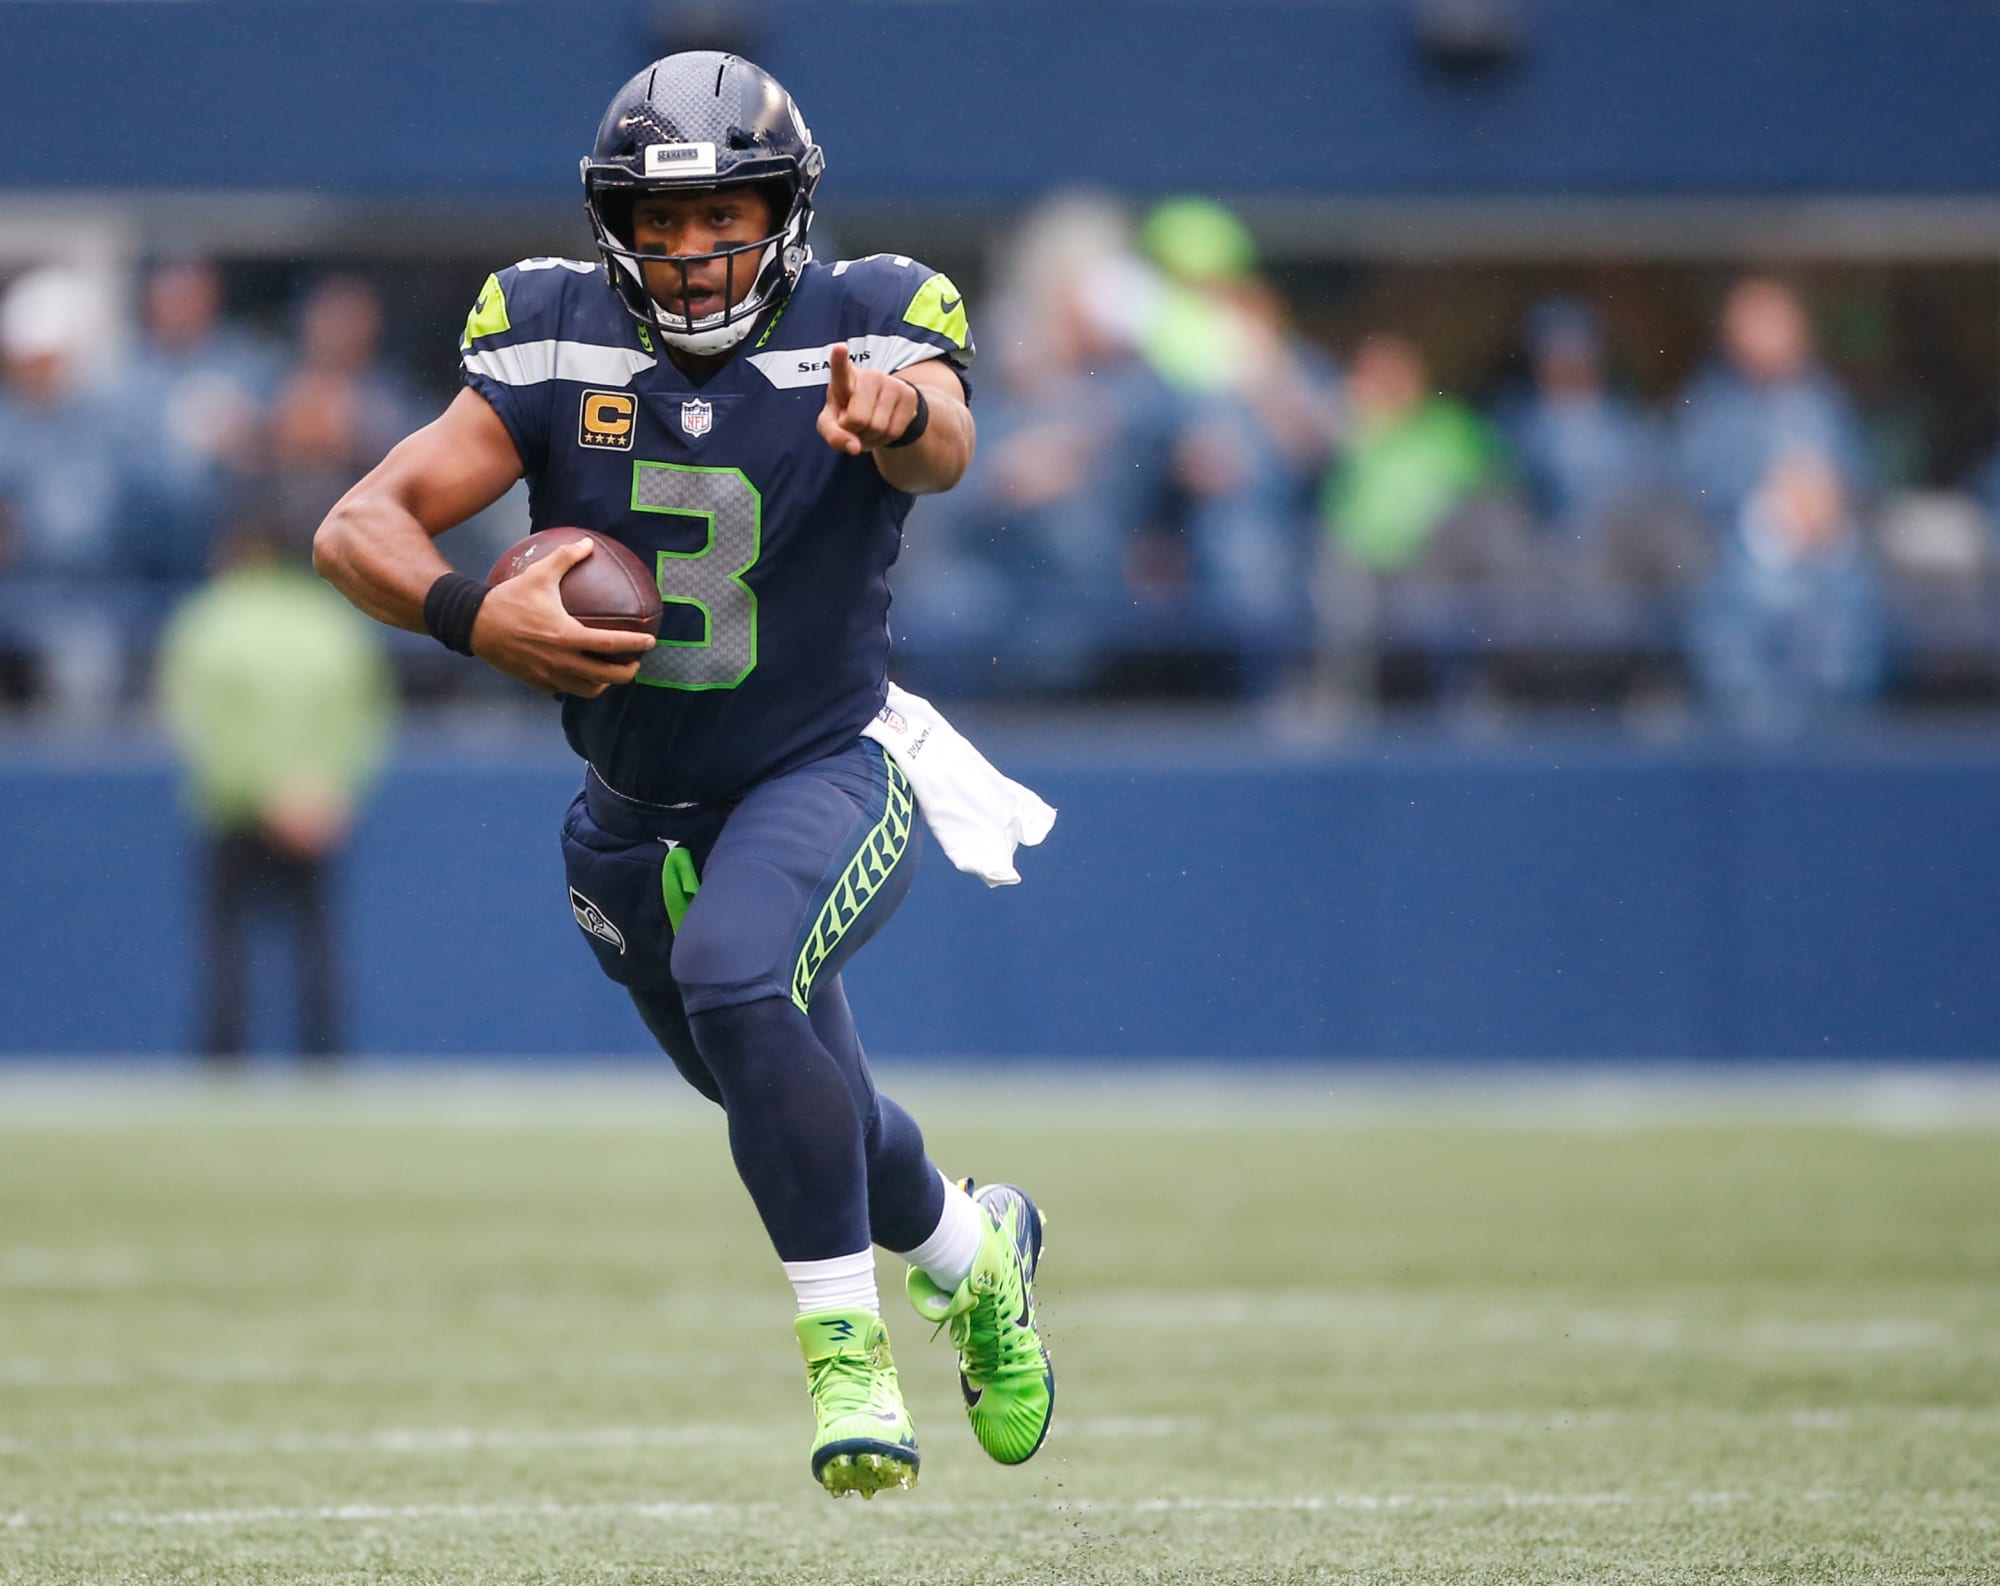 Seahawks vs Titans: Preview, score prediction for Week 3